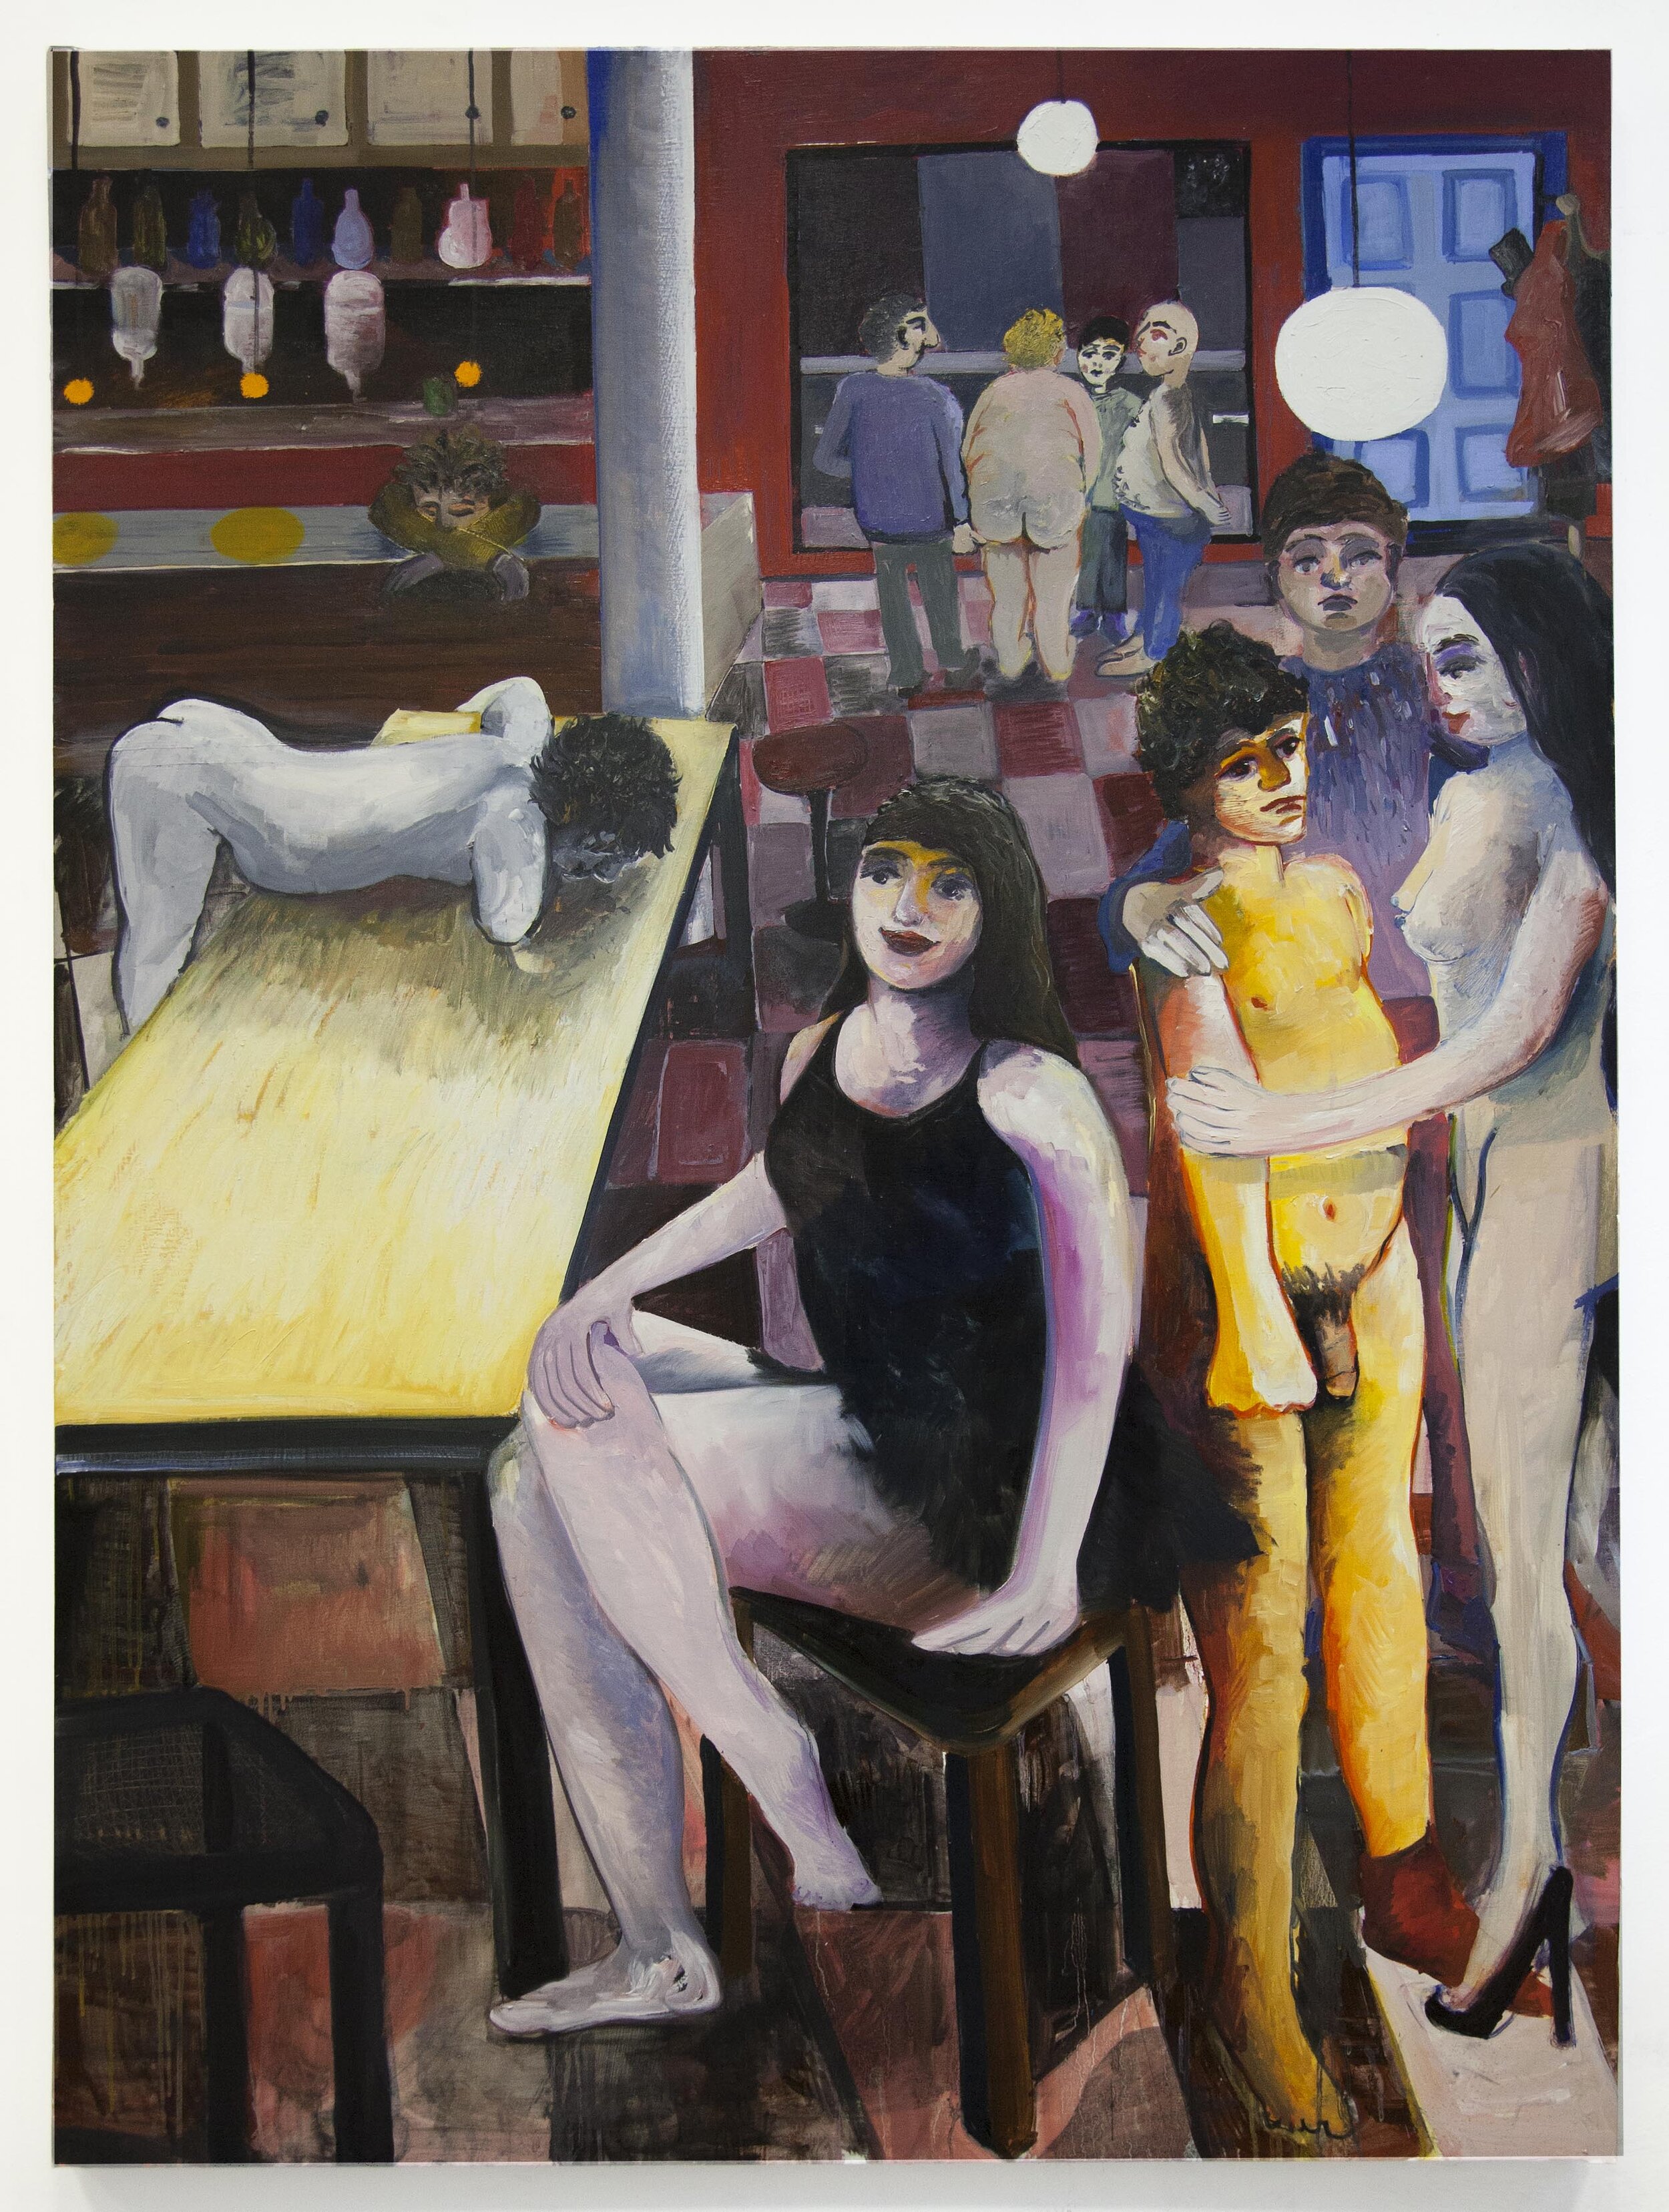  ‘4am and the bar turns up.’ 2019.  Oil on Canvas, 180 X 133 cm  